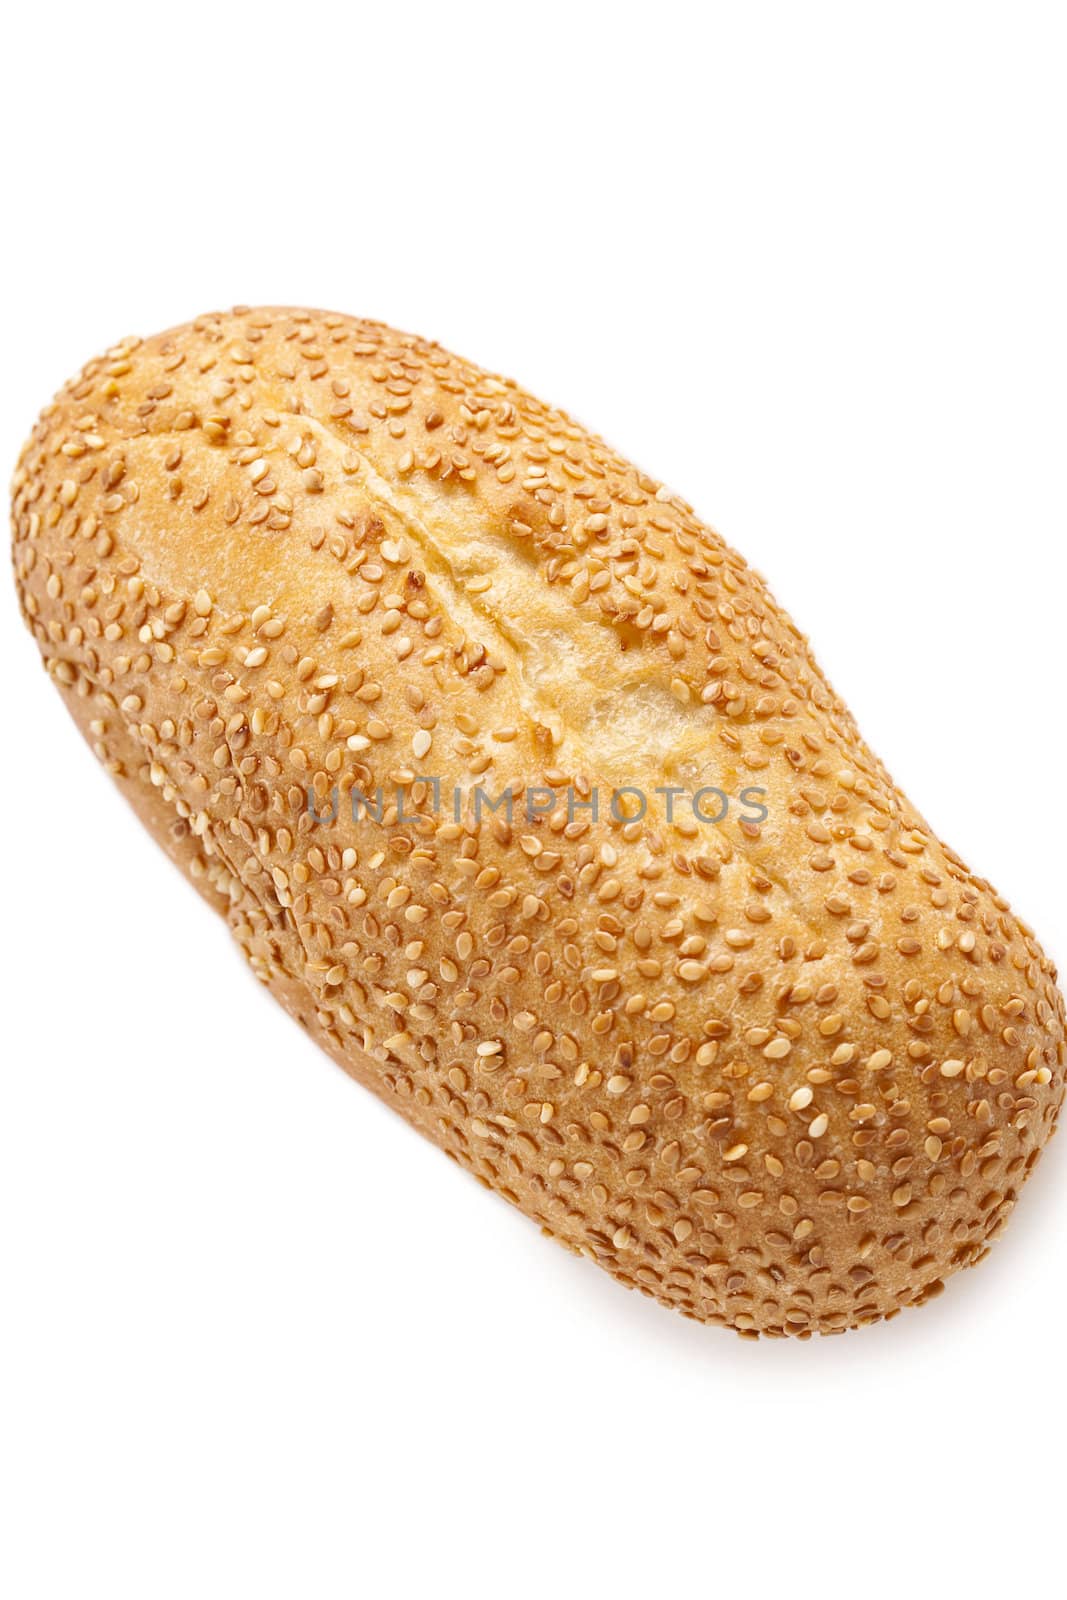  Image of a fresh bread with sesame against white background